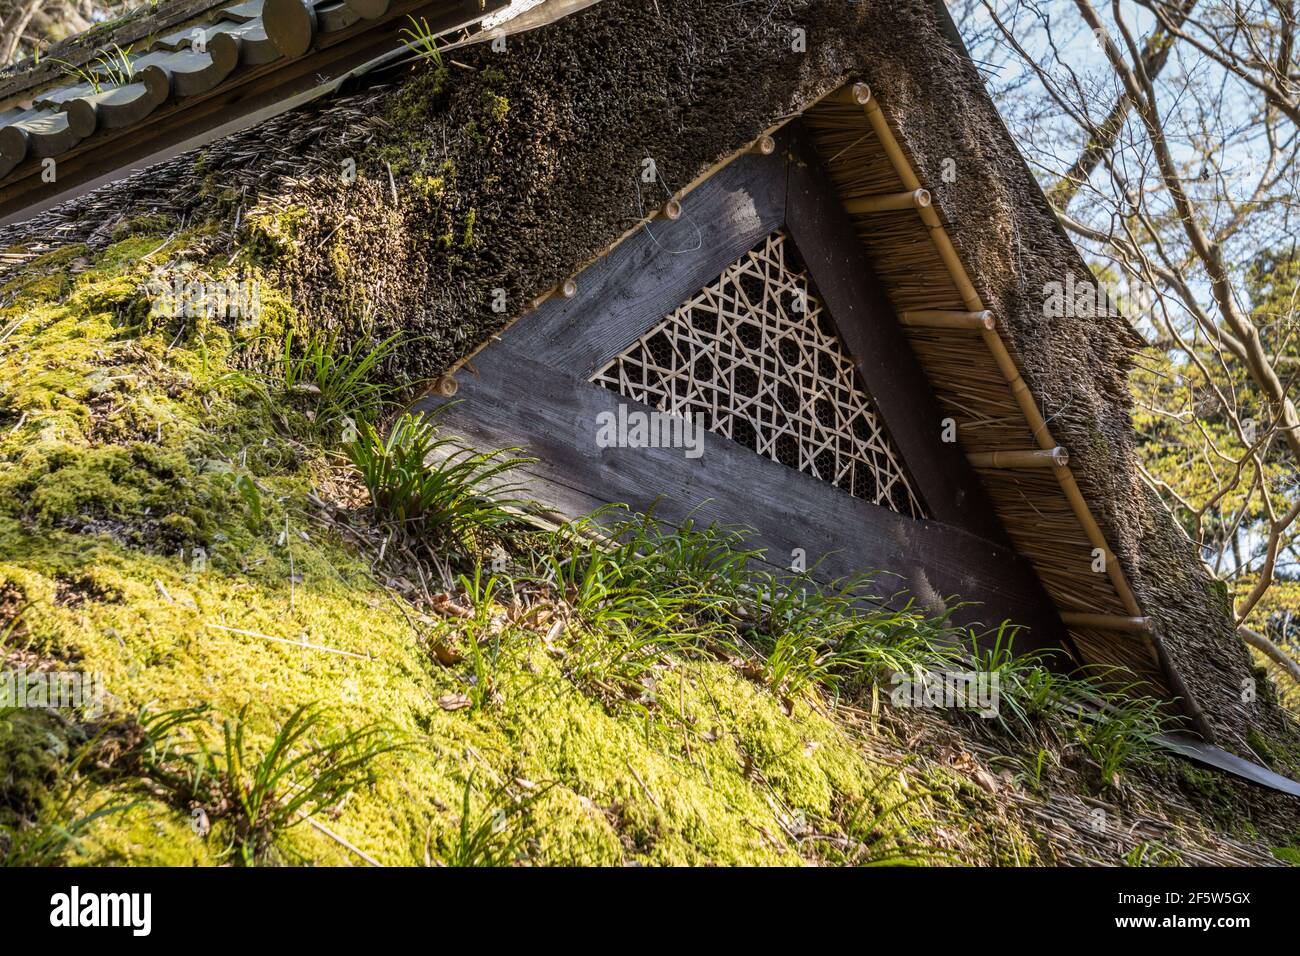 Close up detail of a lattice vent on a traditional Japanese wooden thatched roof covered in moss on an old tea house in Nara, Japan Stock Photo